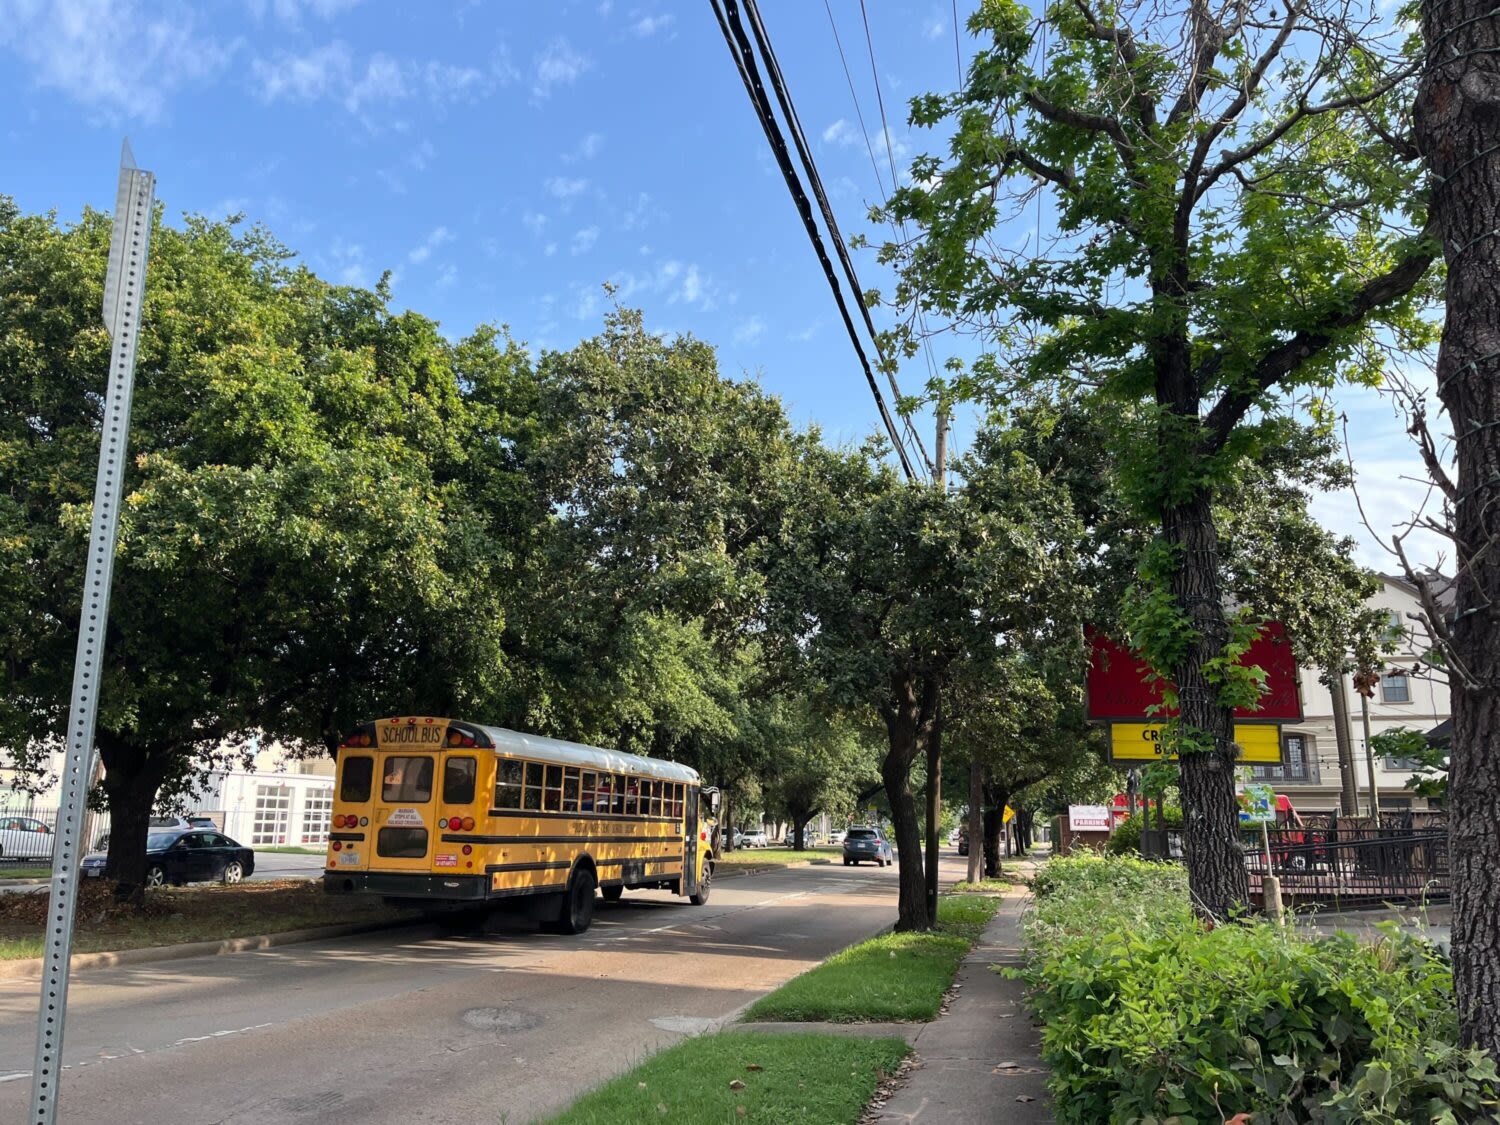 Mayor Whitmire’s pause on mobility projects leaves Montrose redevelopment in limbo and neighbors at odds | Houston Public Media